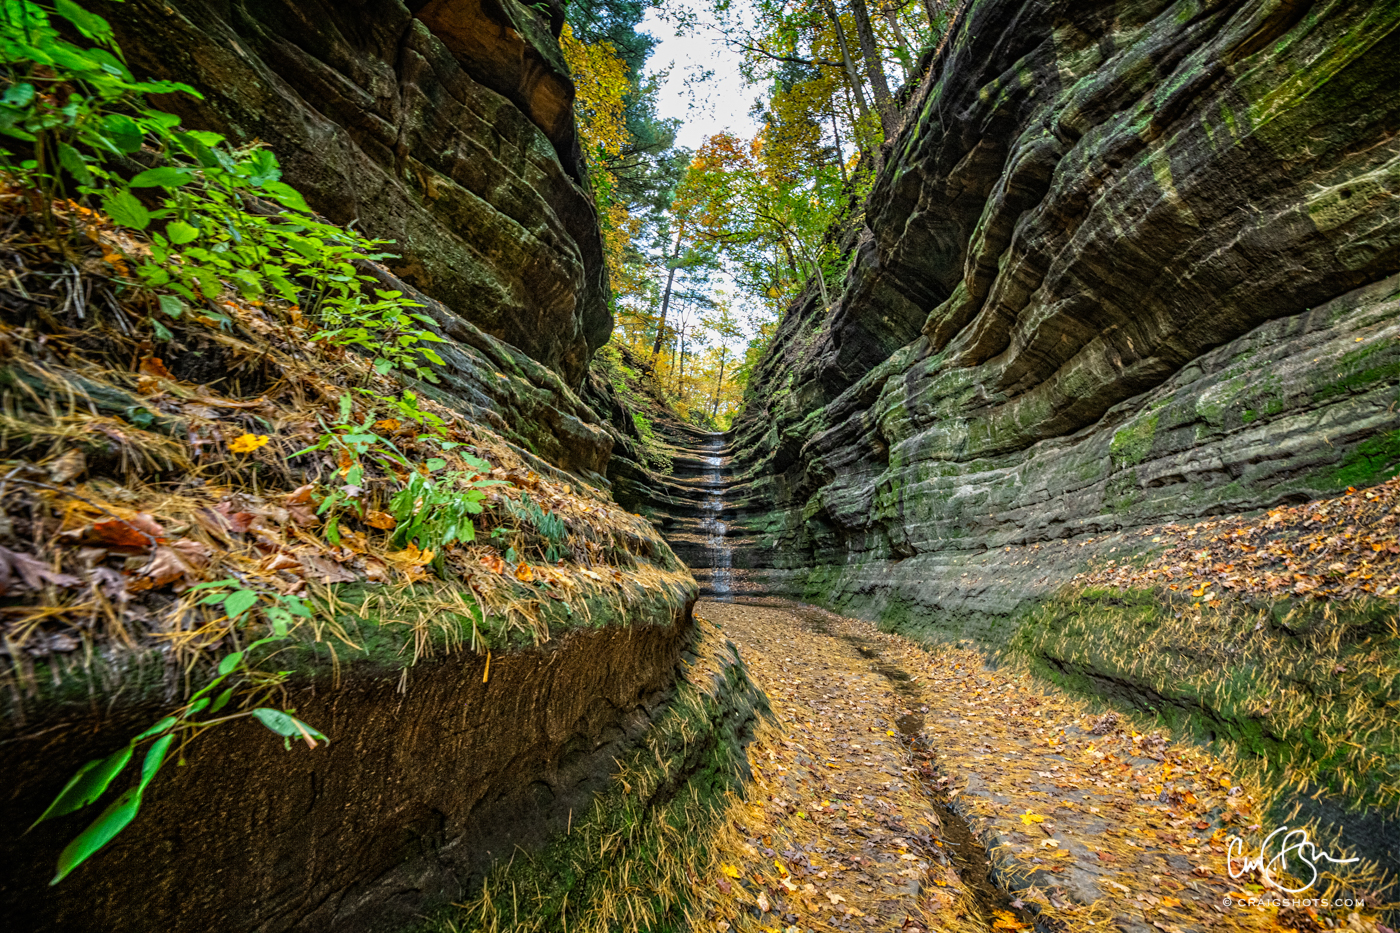 Oct 23: Dead End Canyon, Starved Rock State Park, Illinois